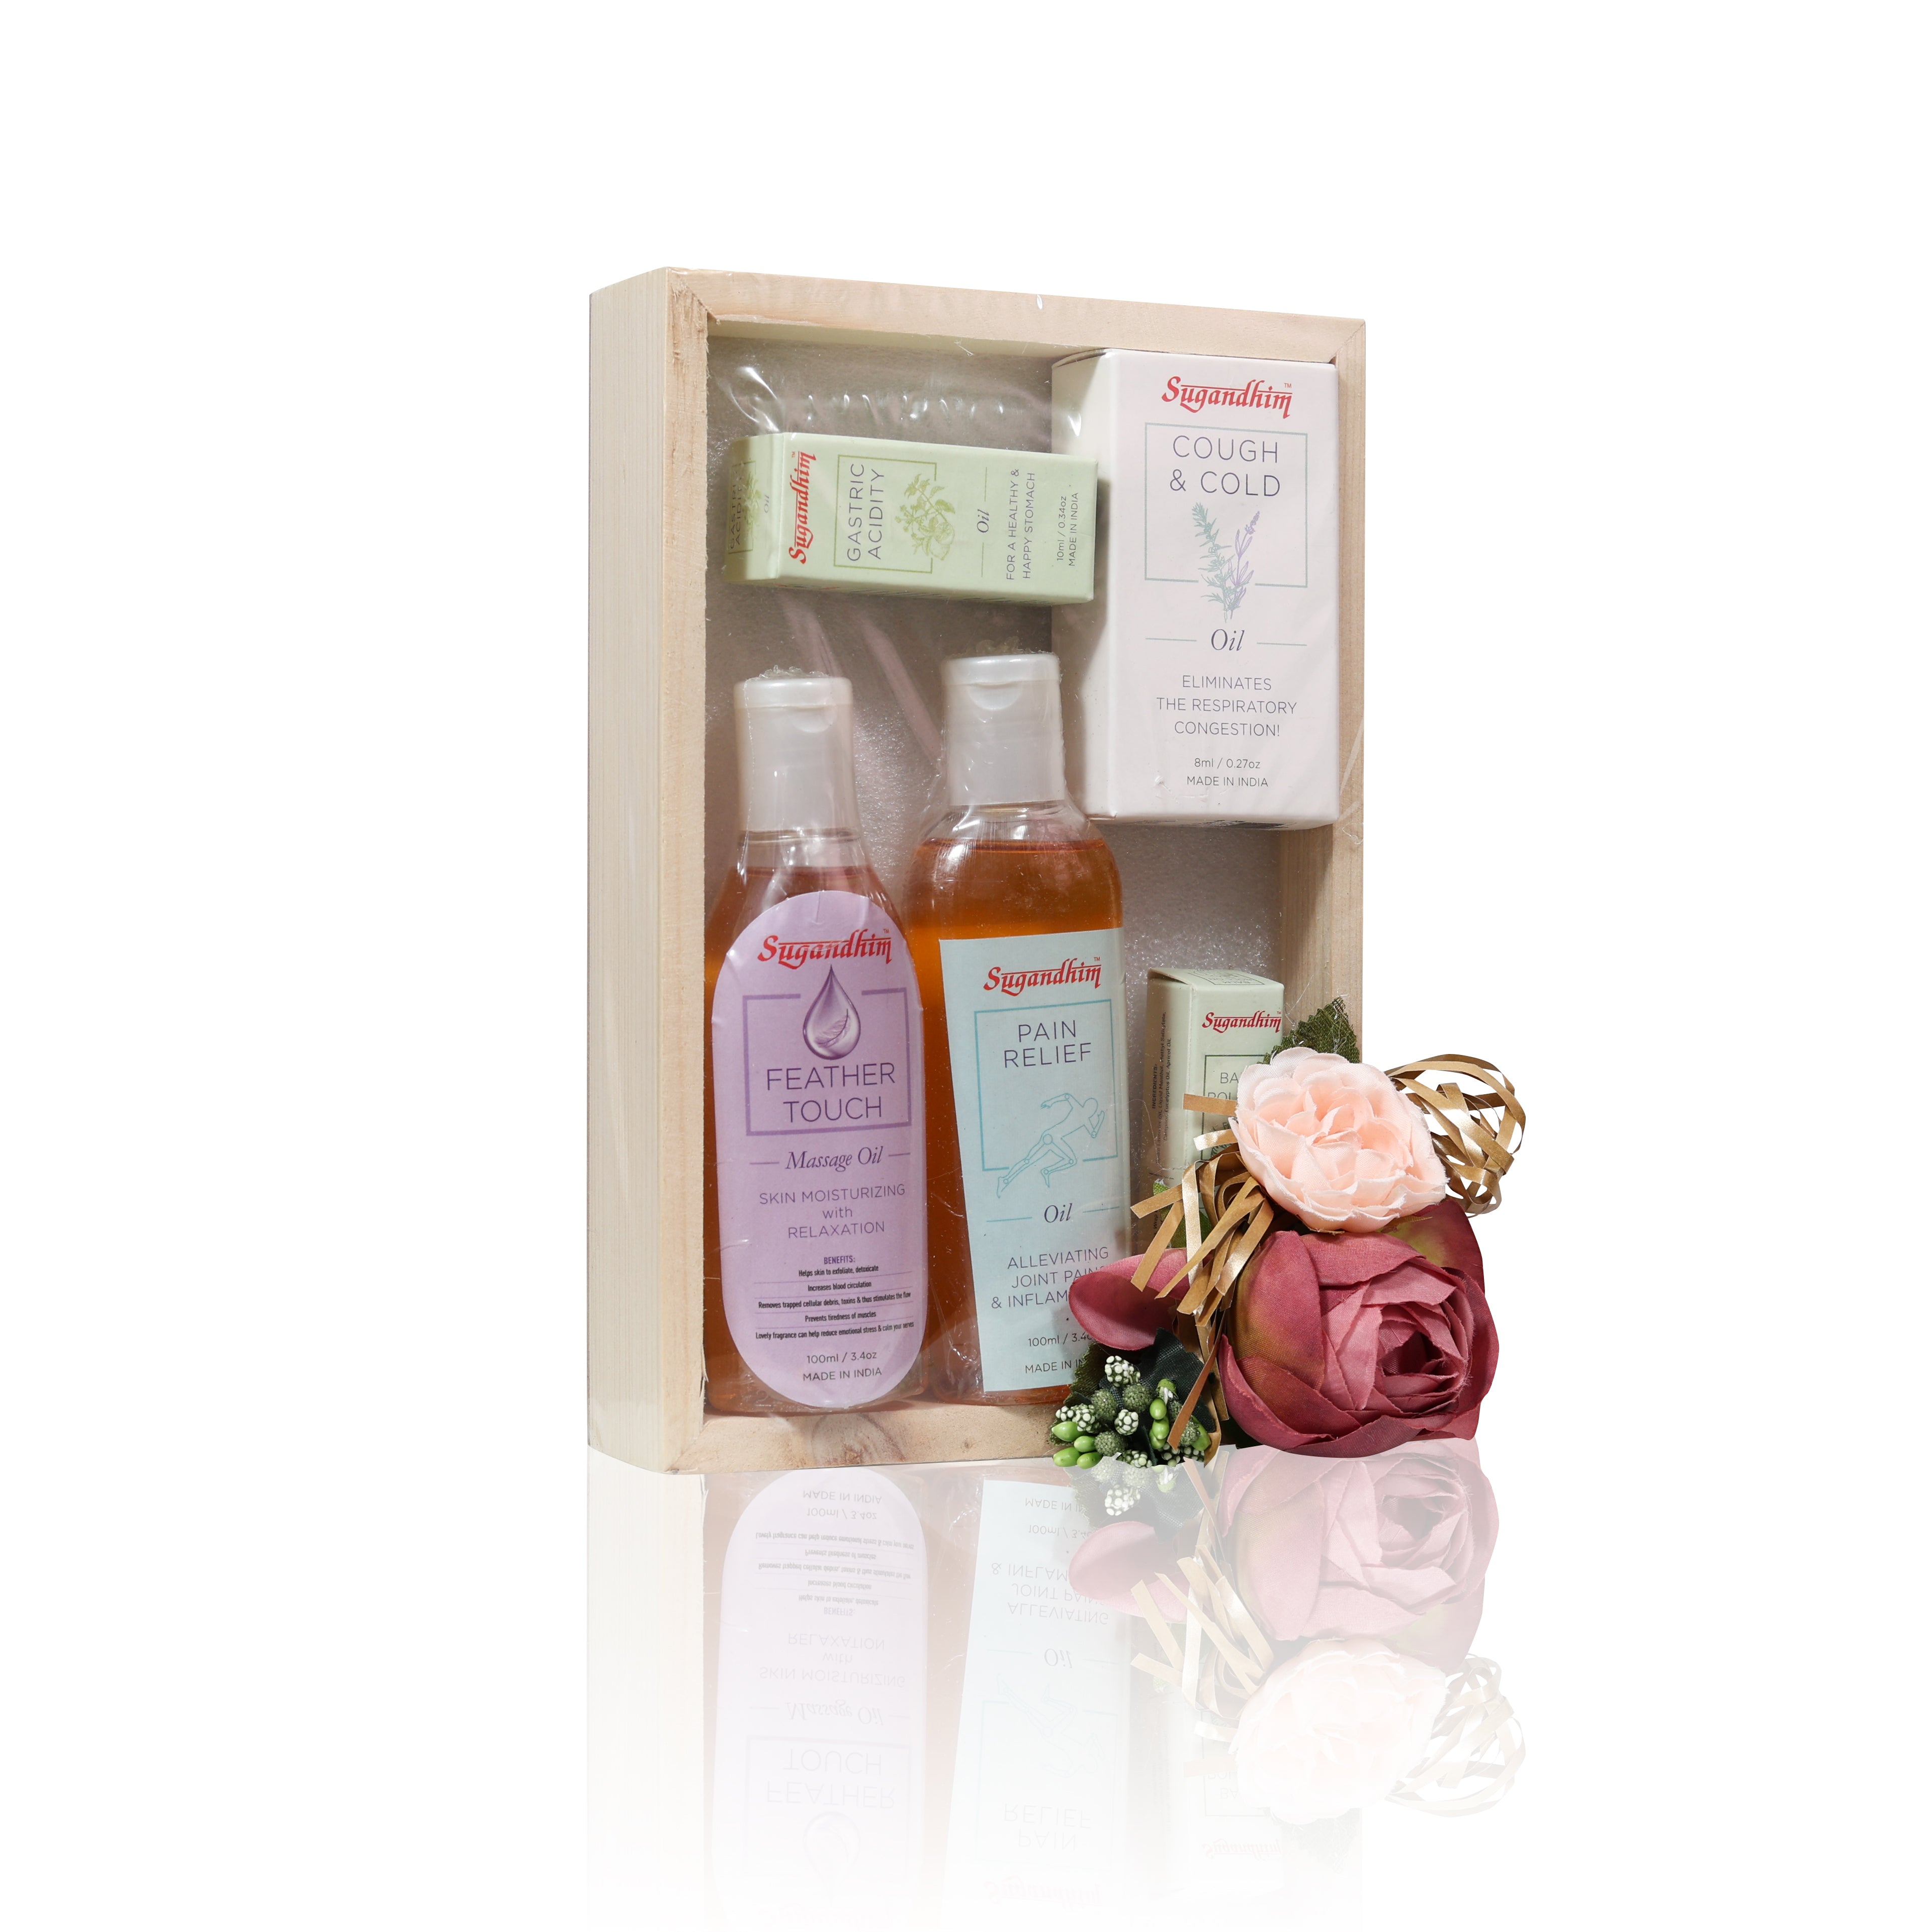 Sugandhim Healing Oils Kit Gift - 5 Products Gifting with Wooden Tray